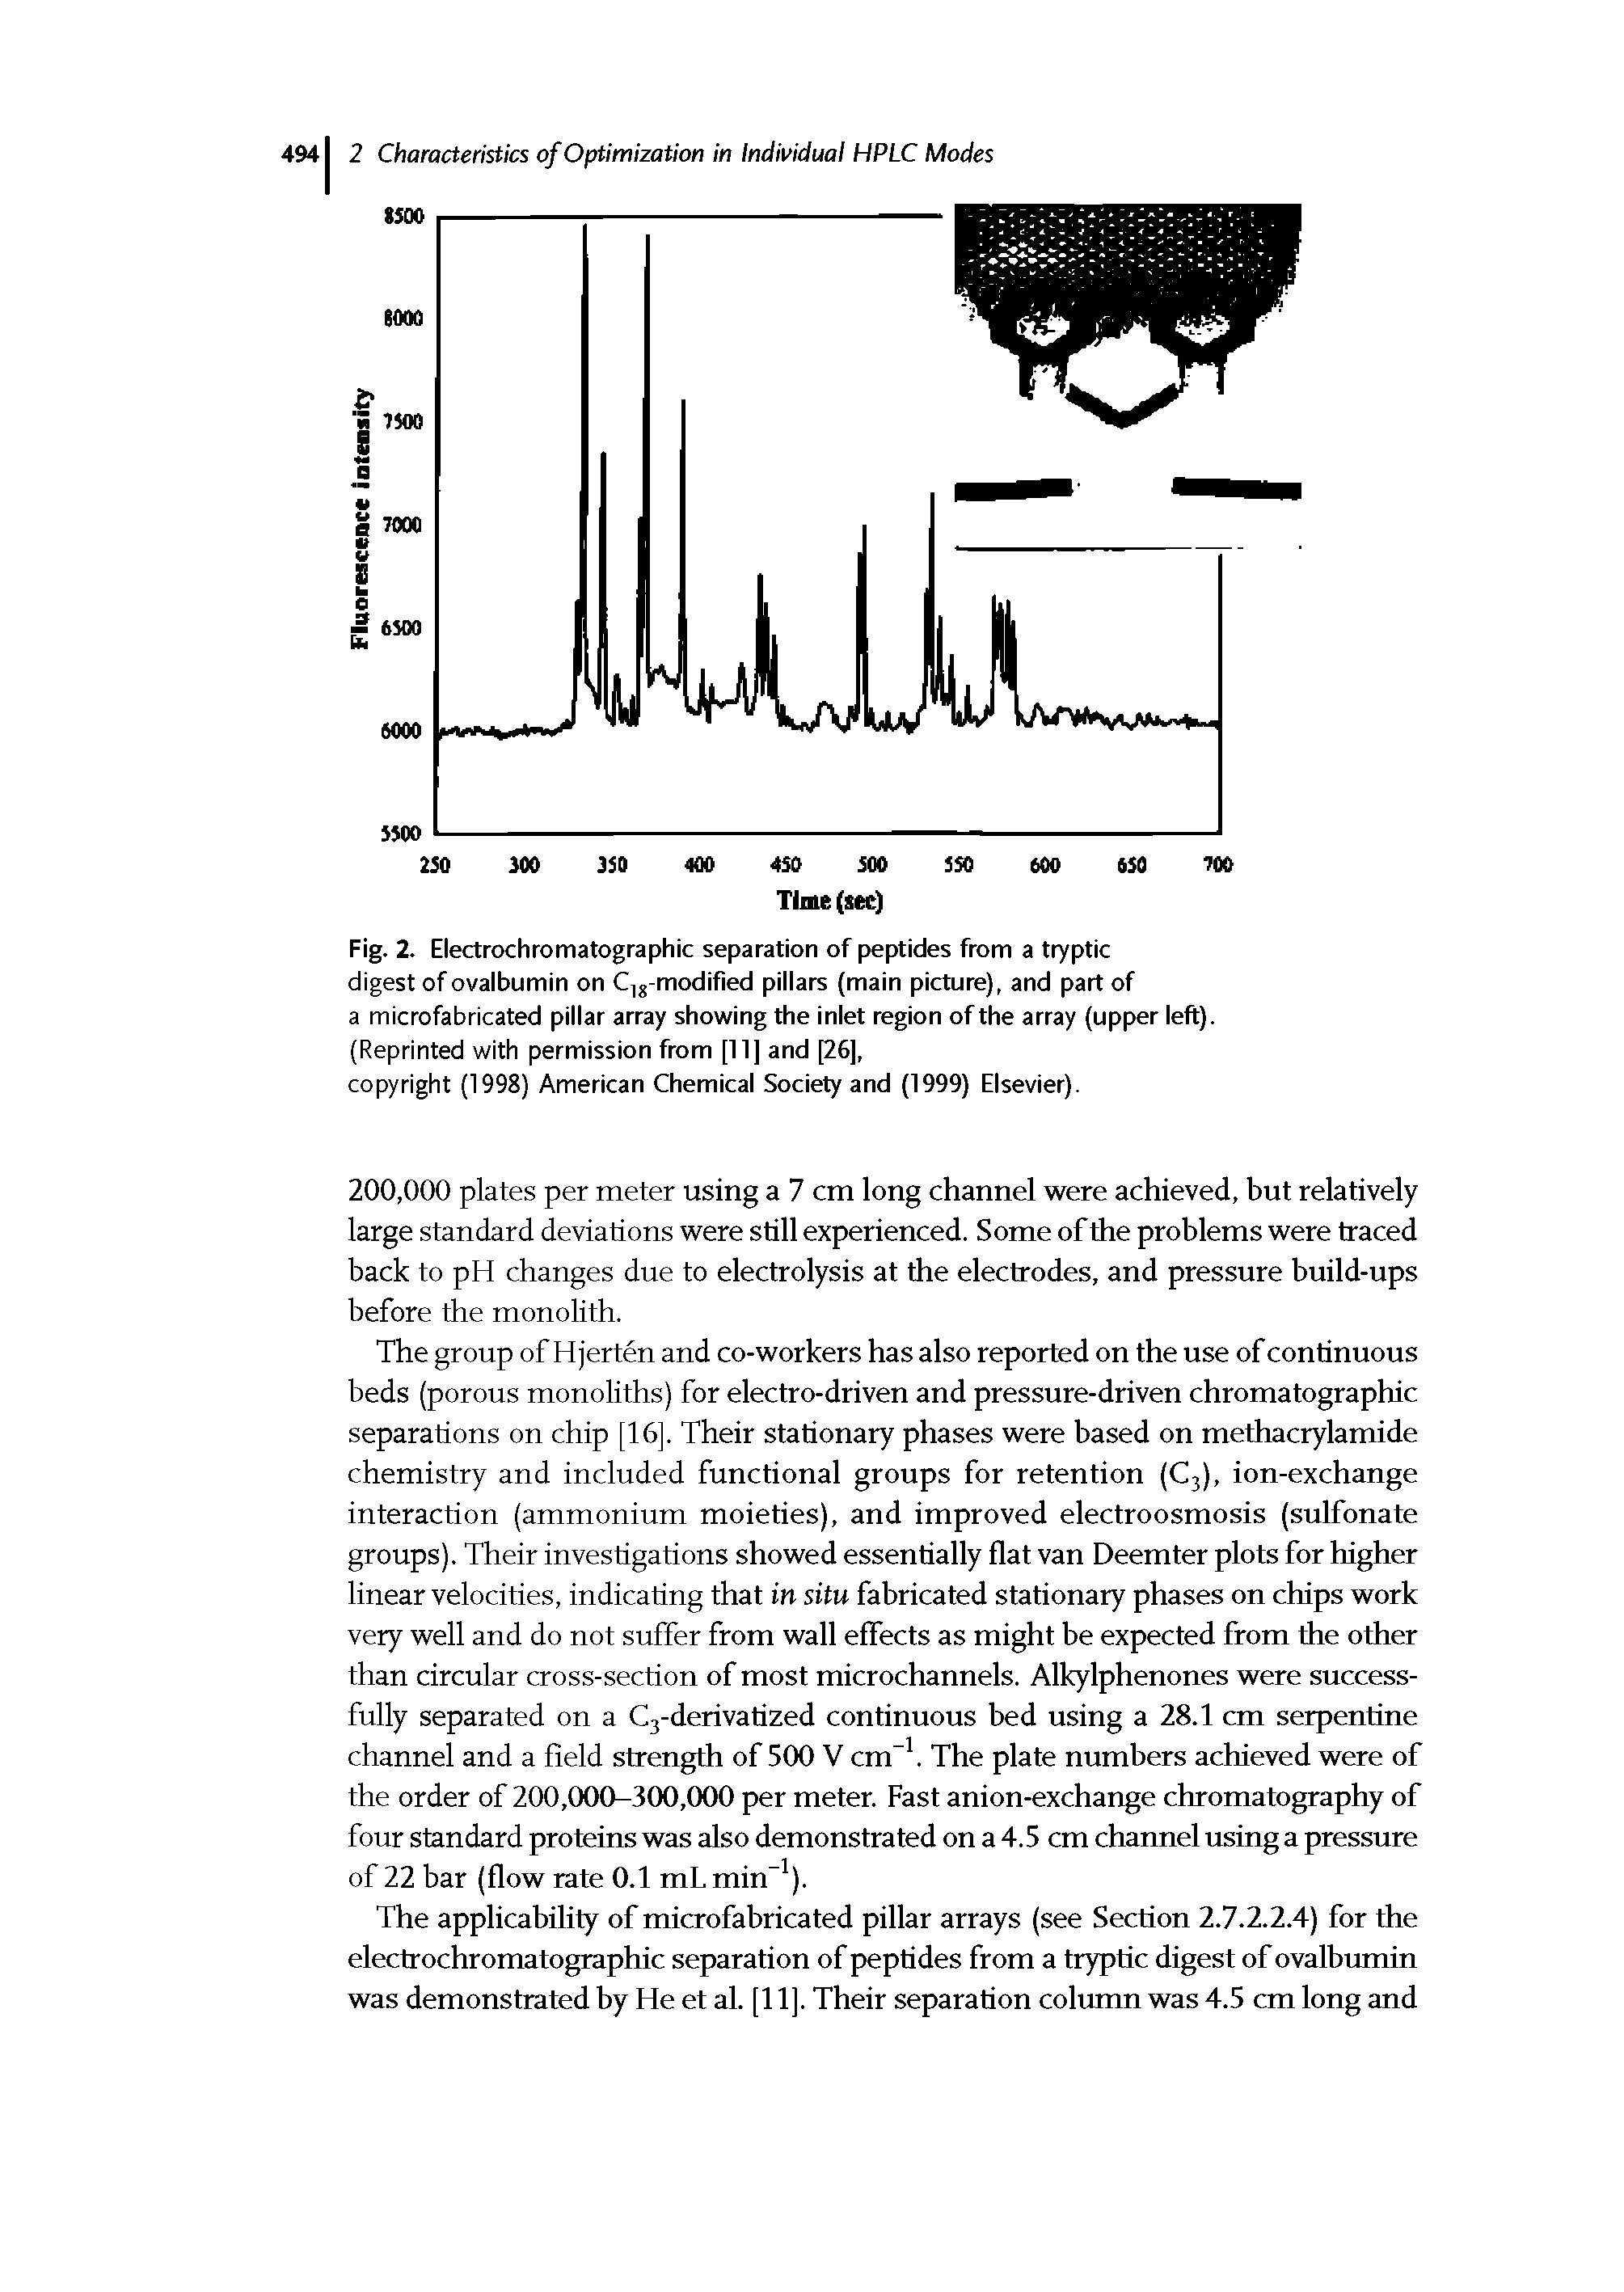 Fig. 2. Electrochromatographic separation of peptides from a tryptic digest of ovalbumin on C,g-modified pillars (main picture), and part of a microfabricated pillar array showing the inlet region of the array (upper left). (Reprinted with permission from [11] and [26], copyright (1998) American Chemical Society and (1999) Elsevier).